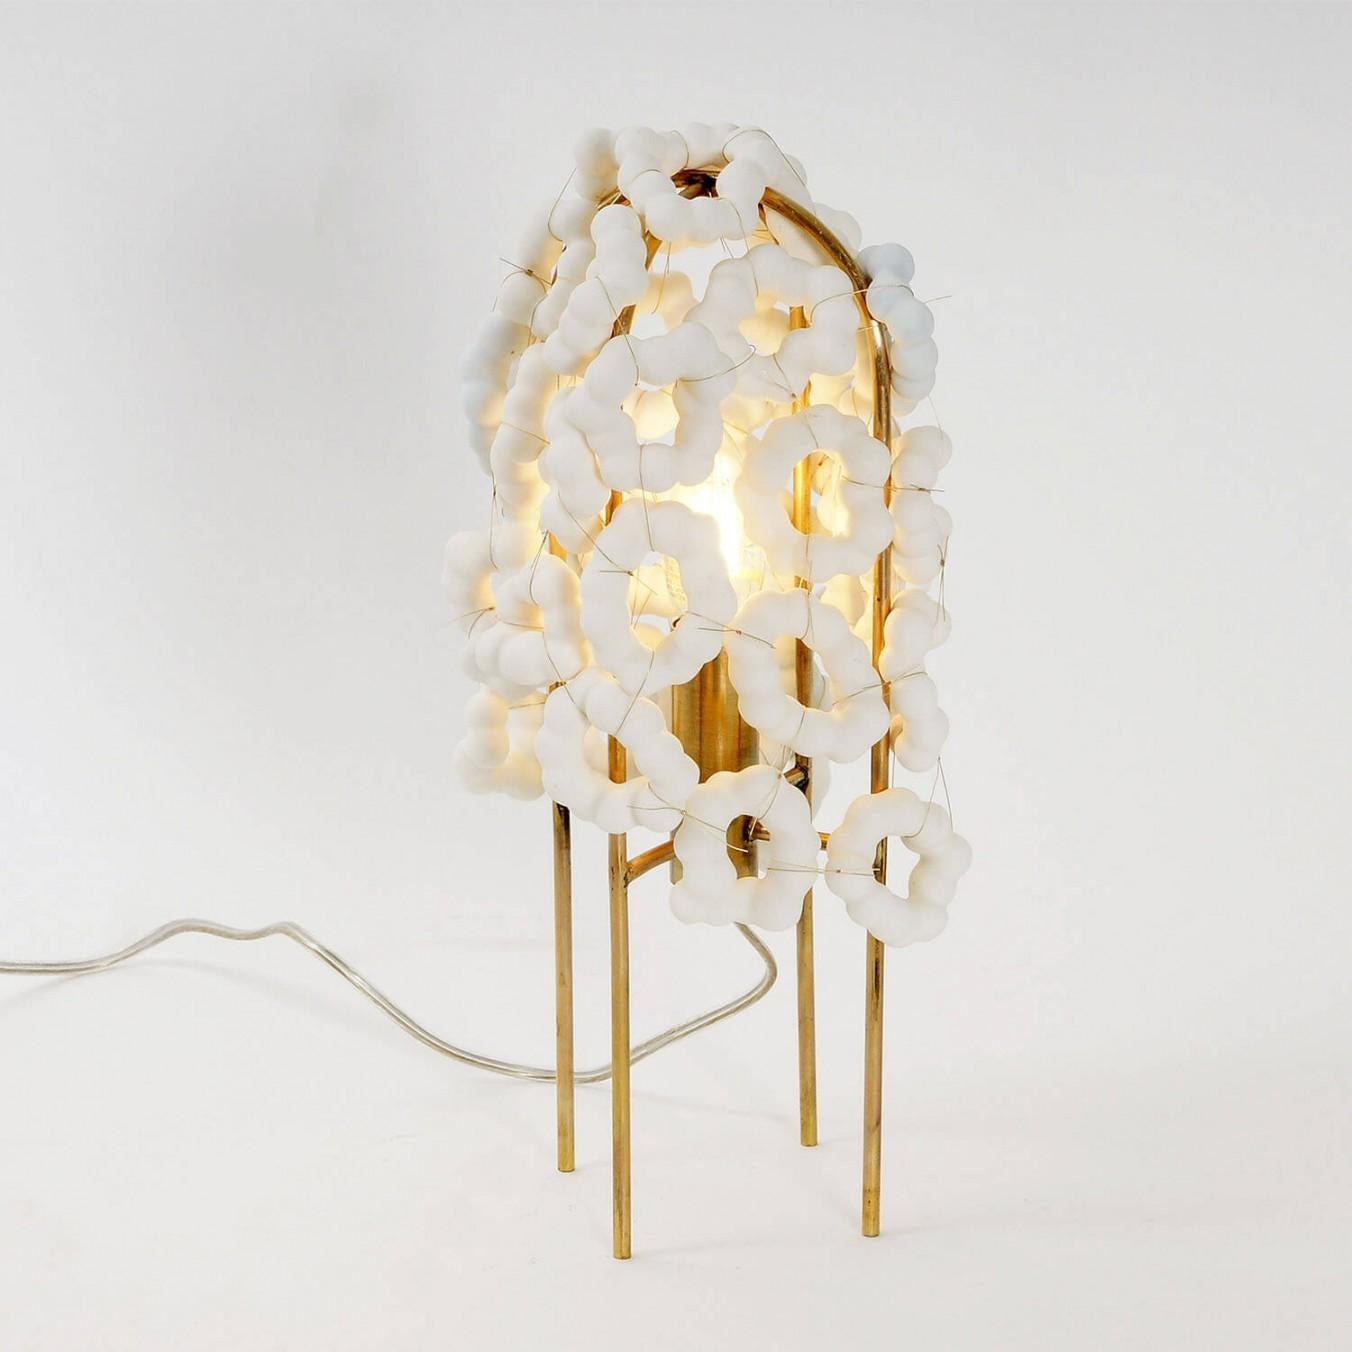 Contemporary porcelain and brass table lamp - akoya light by Johannes Hemann

Material: porcelain, brass
Light source: bulb E14, max 50 Watt
Dimensions: ø16 x H 33 cm

The Akoya table light was created by putting glue on cotton balls and